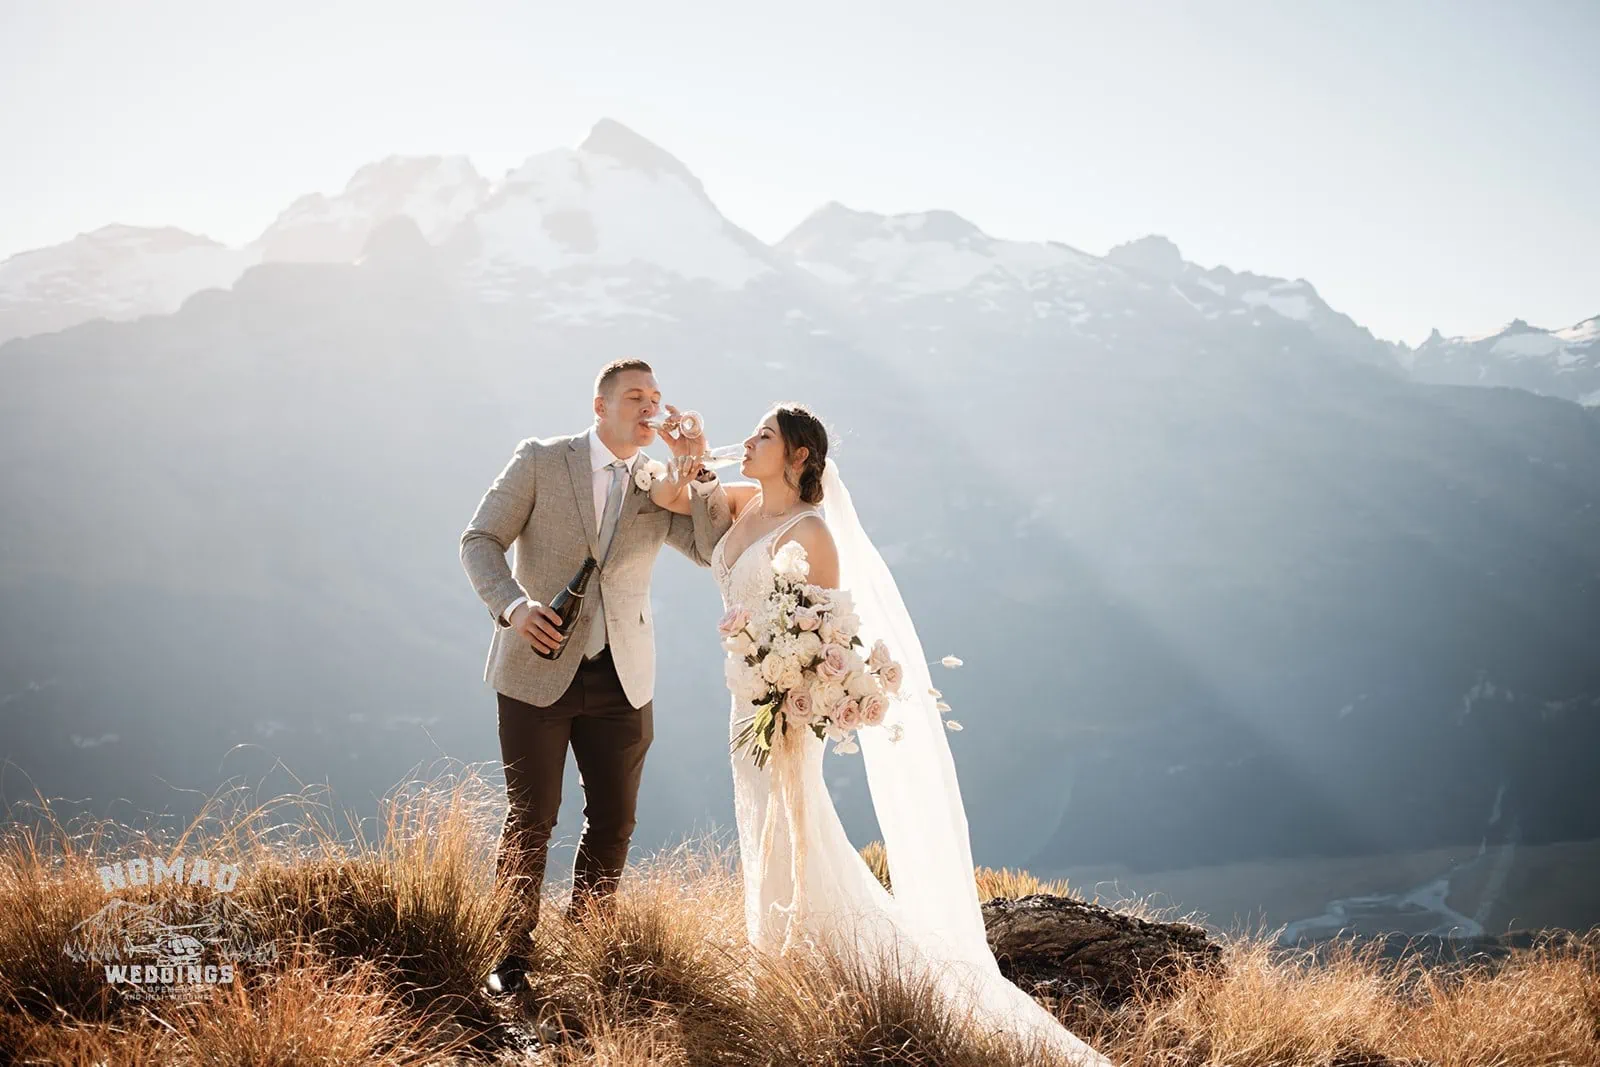 Amy & Eden's enchanting Heli Elopement Wedding on top of a mountain in New Zealand.